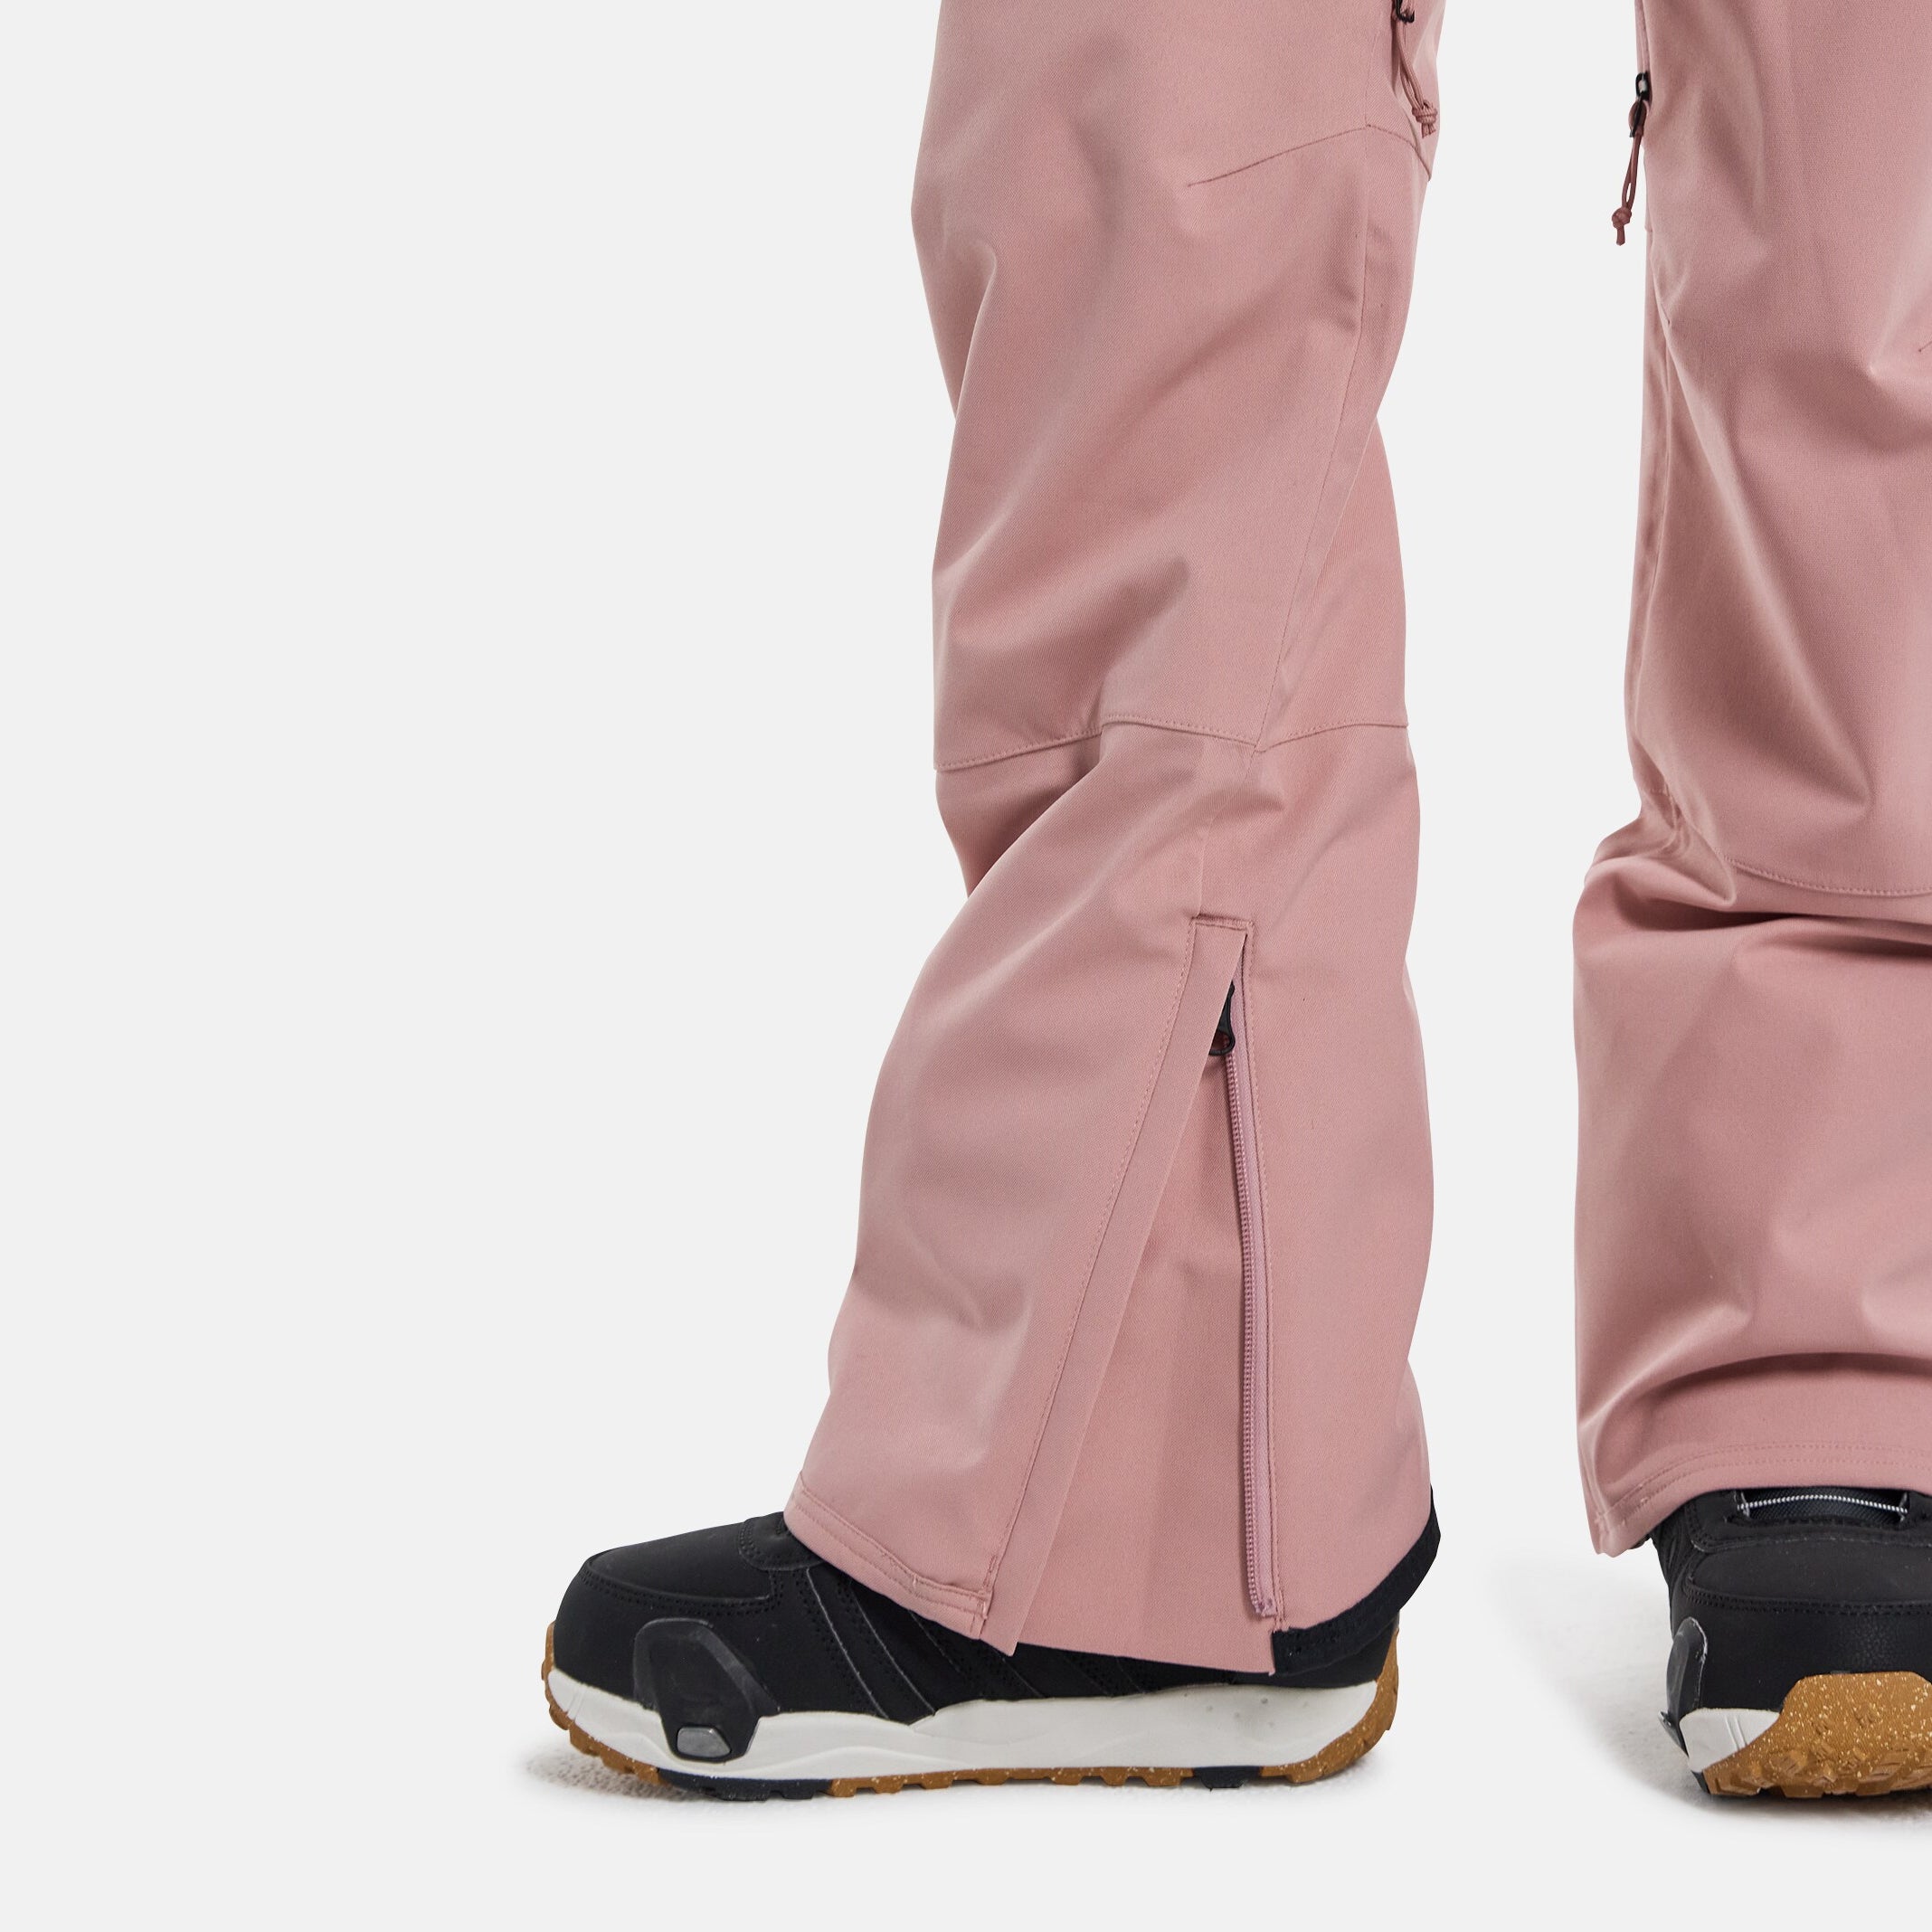 Girls Pink Snow Trousers